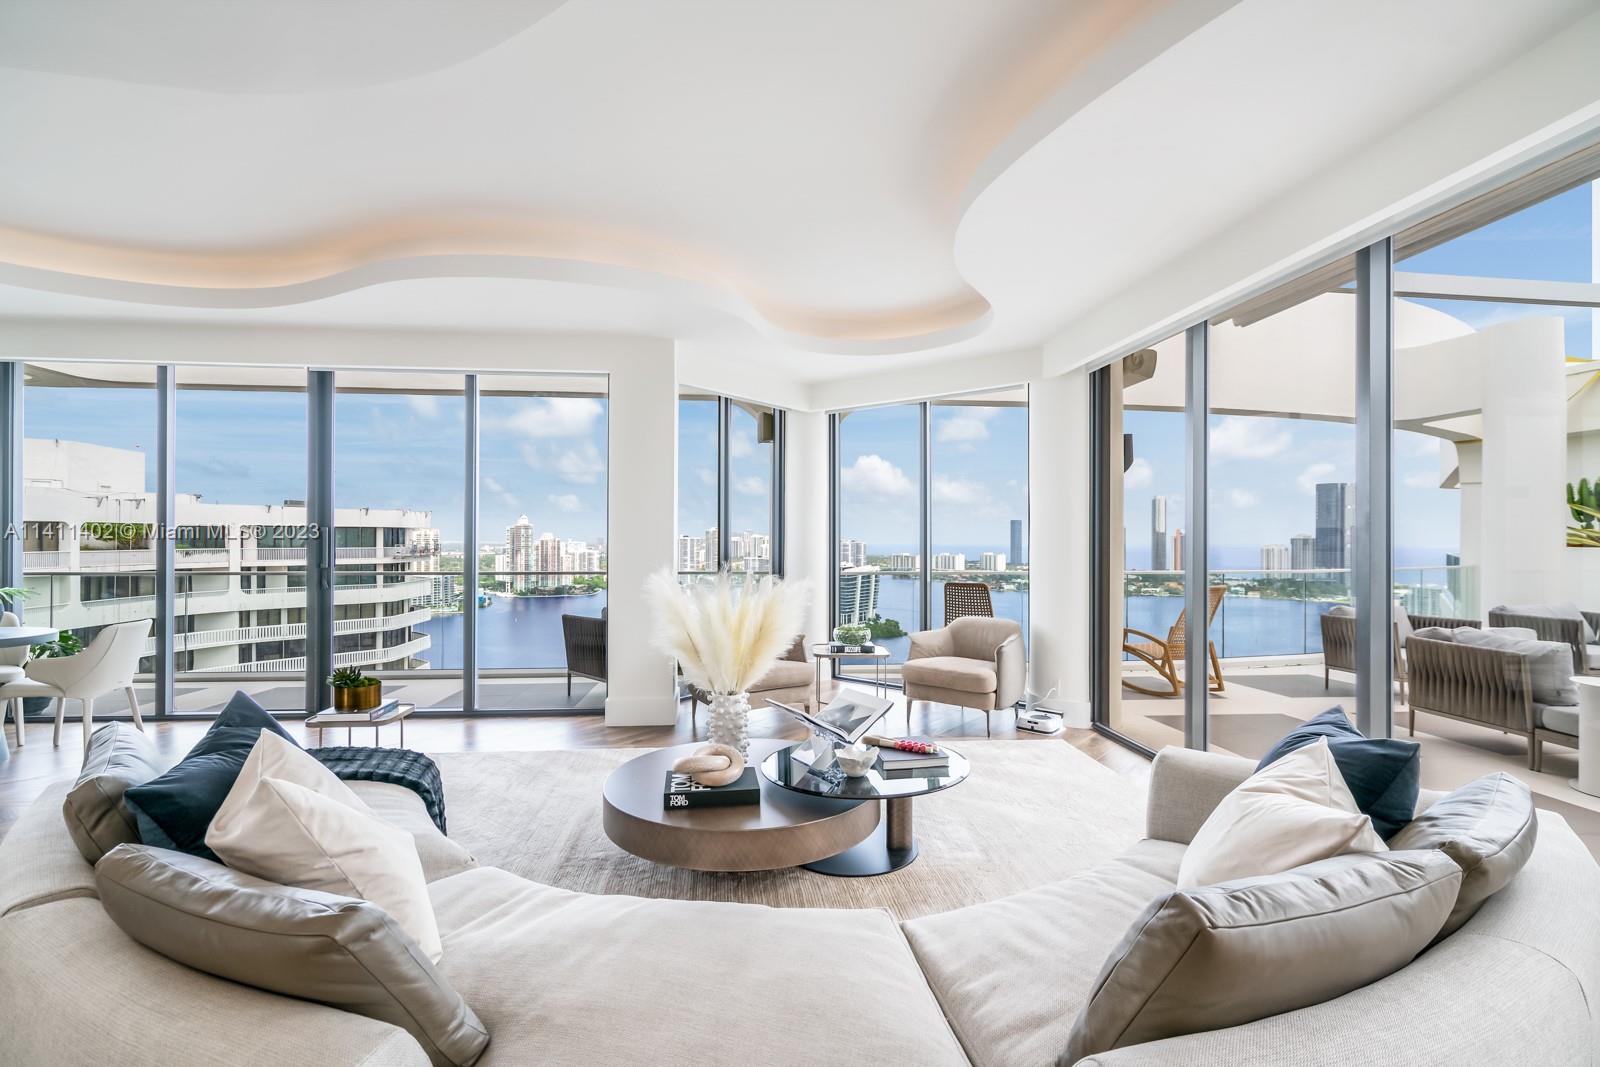 Escape the hustle and bustle of the city in the exquisite luxury corner penthouse, located at 2800 Island Boulevard, #PH03, in the prestigious Williams Island. You can enjoy both city and water views from three outdoor patios. With 5 bedrooms, 6 full bathrooms, and 4,780 square feet, there’s plenty of room for both family and friends to visit. Some of the interior features include 12’ ceilings, a 900-bottle wine cellar, a cigar room, and integrated smart home technology. Amenities on the island include 3 restaurants, 16 tennis courts, a 27,000-square-foot spa, a marina, a walking trail, a playground, a courtesy bus, and more. Do not miss out on this stunning Williams Island gem!